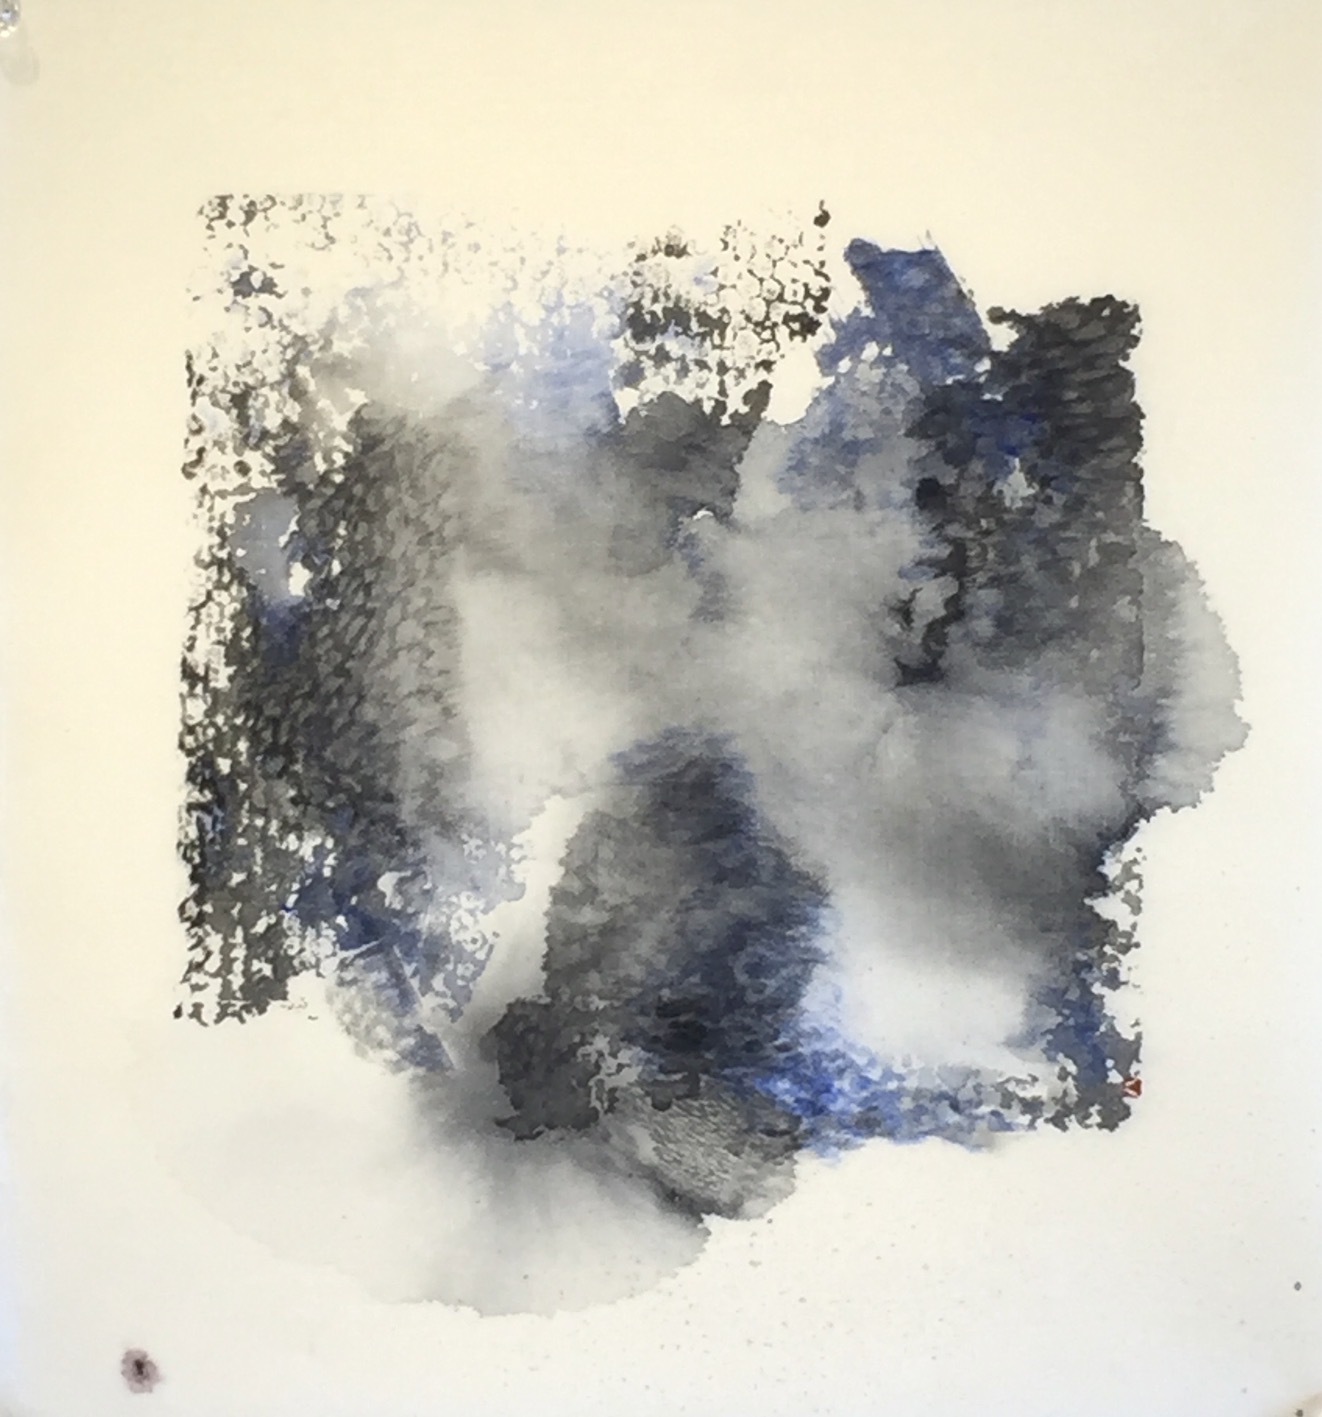 Sky in a Square 1 35 X 33 cms sumi ink, acrylic 空の資格　1 墨アクリル　2020